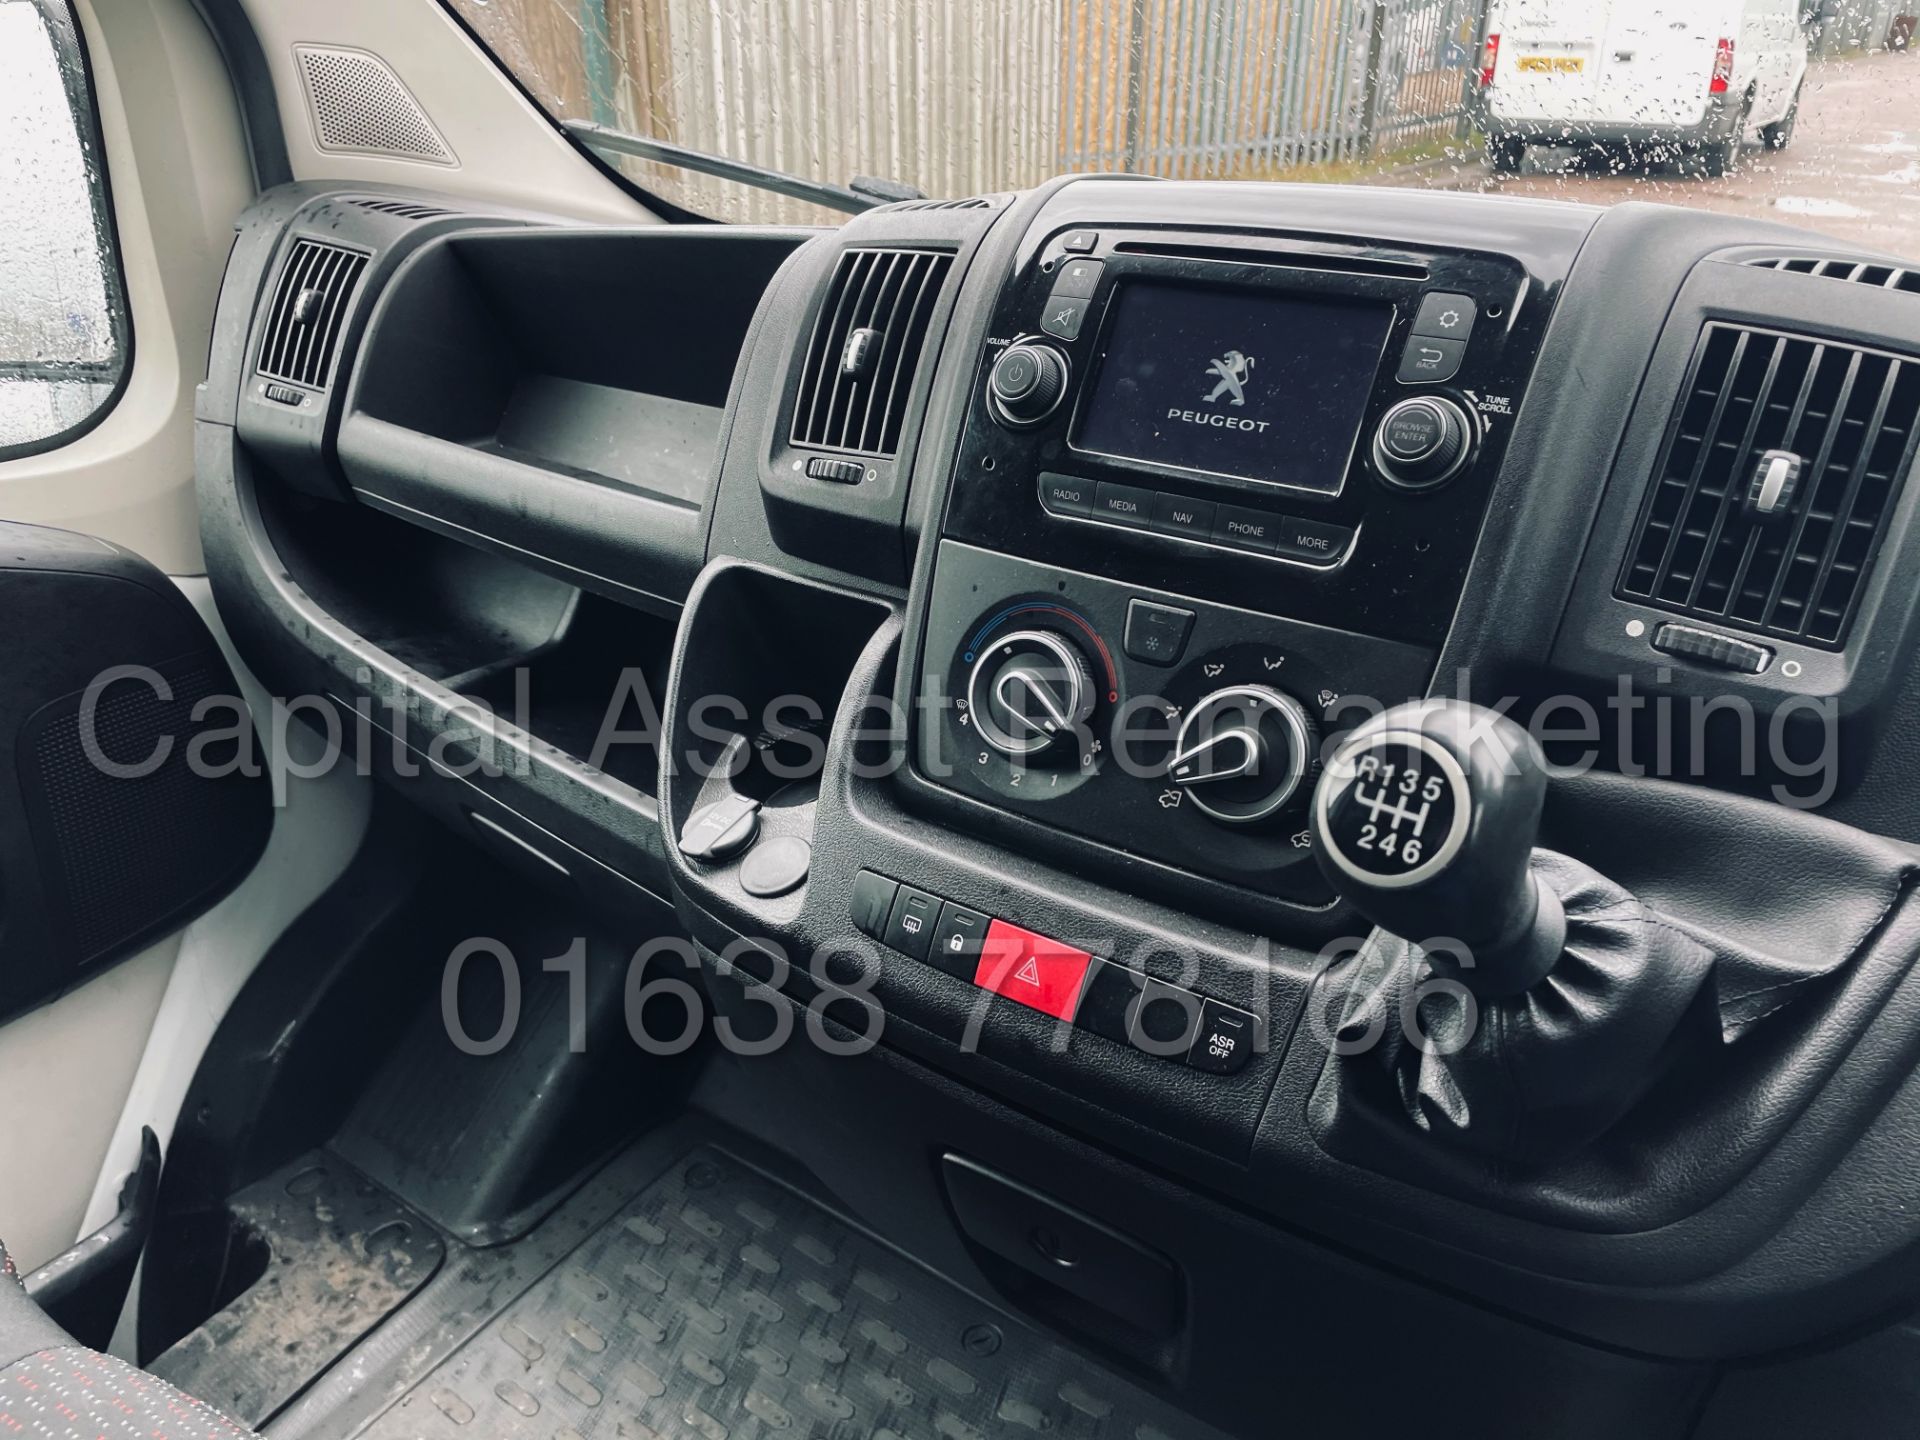 (On Sale) PEUGEOT BOXER 335 *PROFESSIONAL* LWB HI-ROOF (2016) '2.2 HDI - 6 SPEED' *A/C* (1 OWNER) - Image 32 of 41